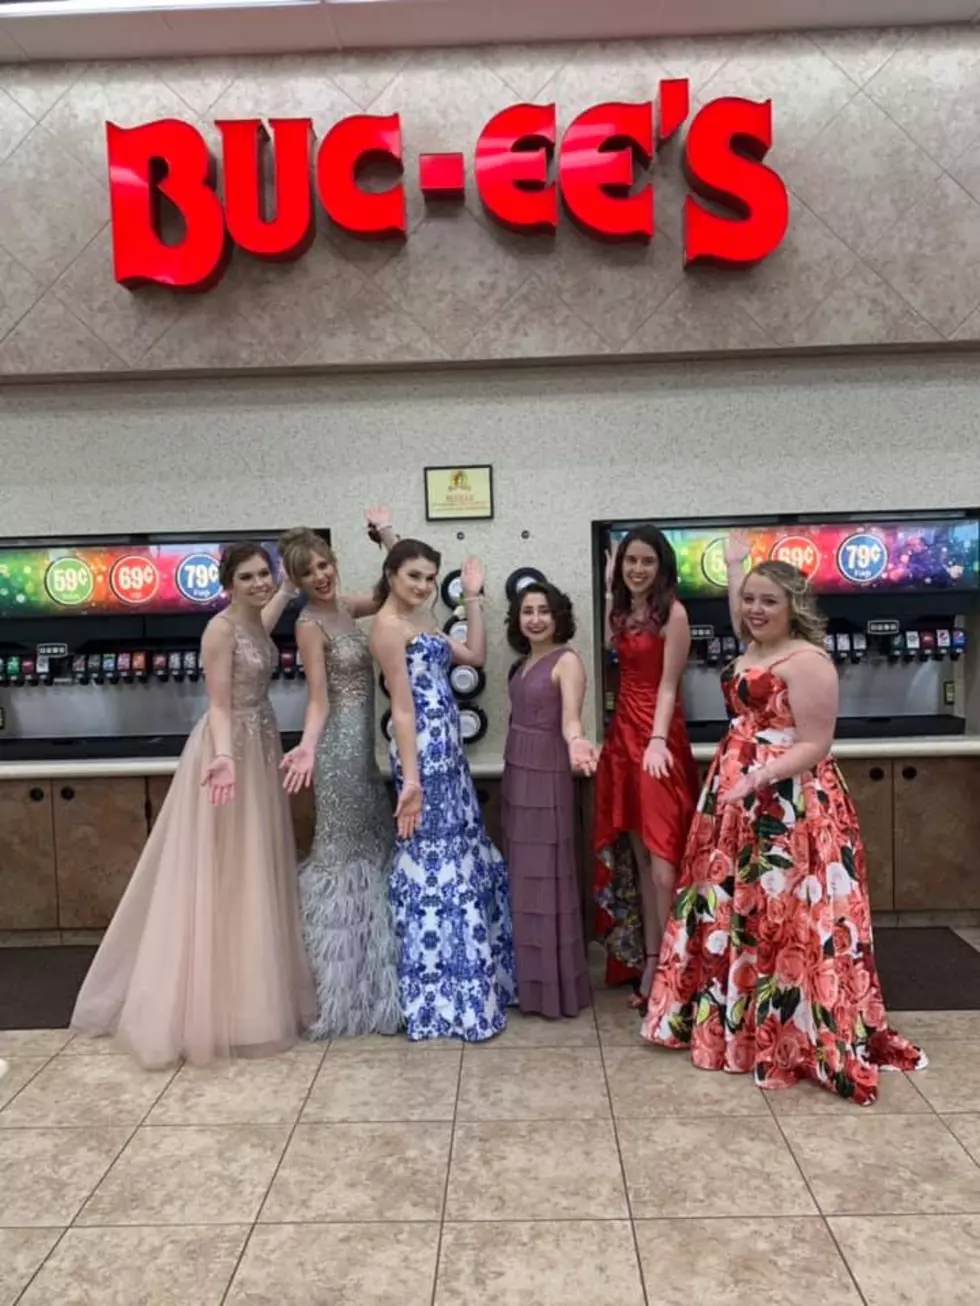 Texas Teens Take Prom Photos at Buc-ee’s in the Best Prom Photos Ever